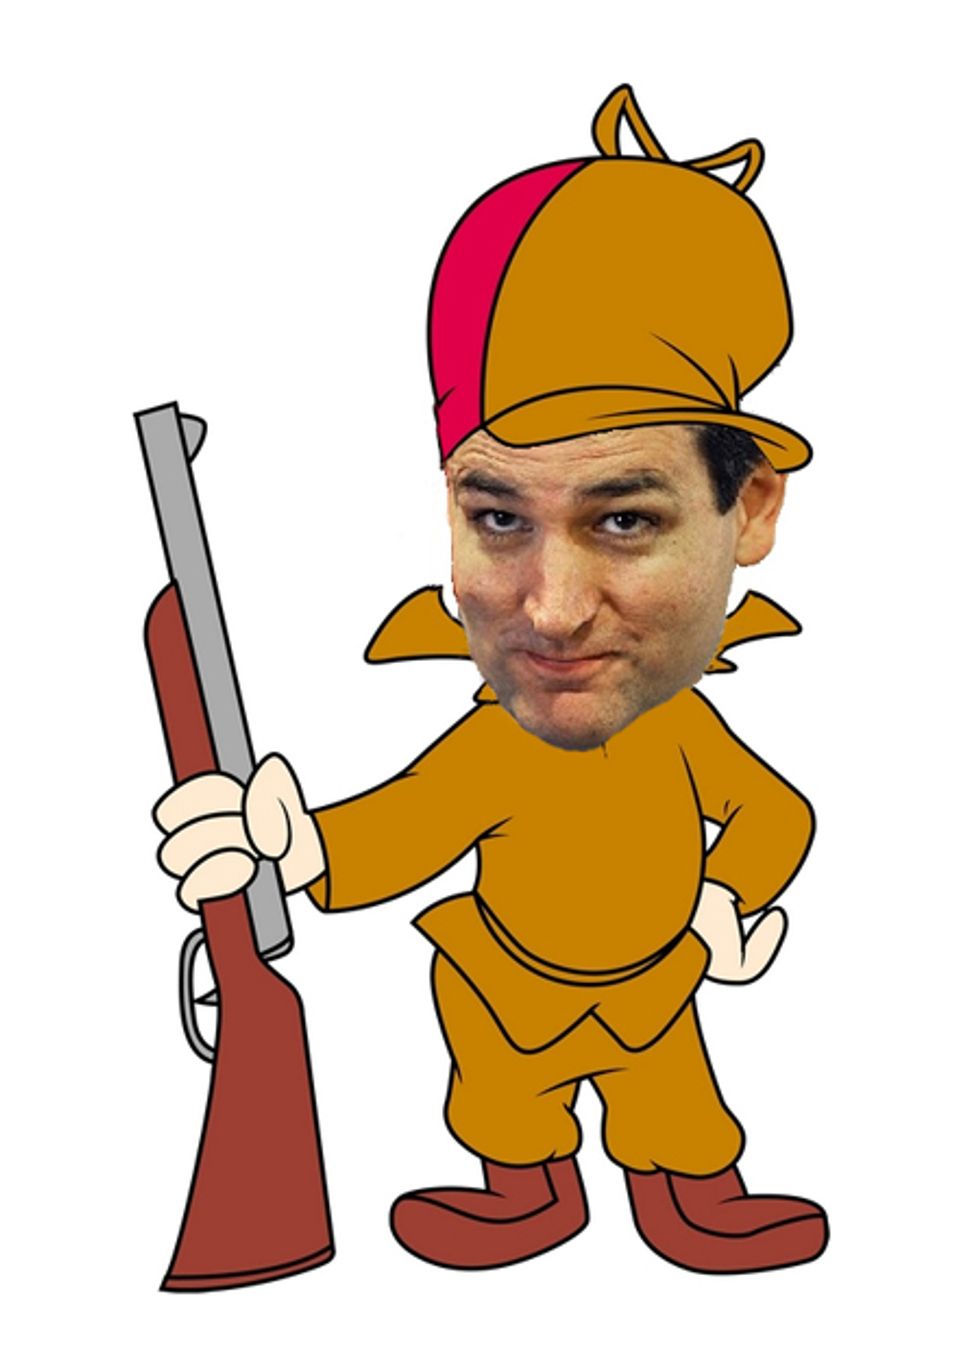 Ted Cruz Supports Gun Control, To Protect Ted Cruz